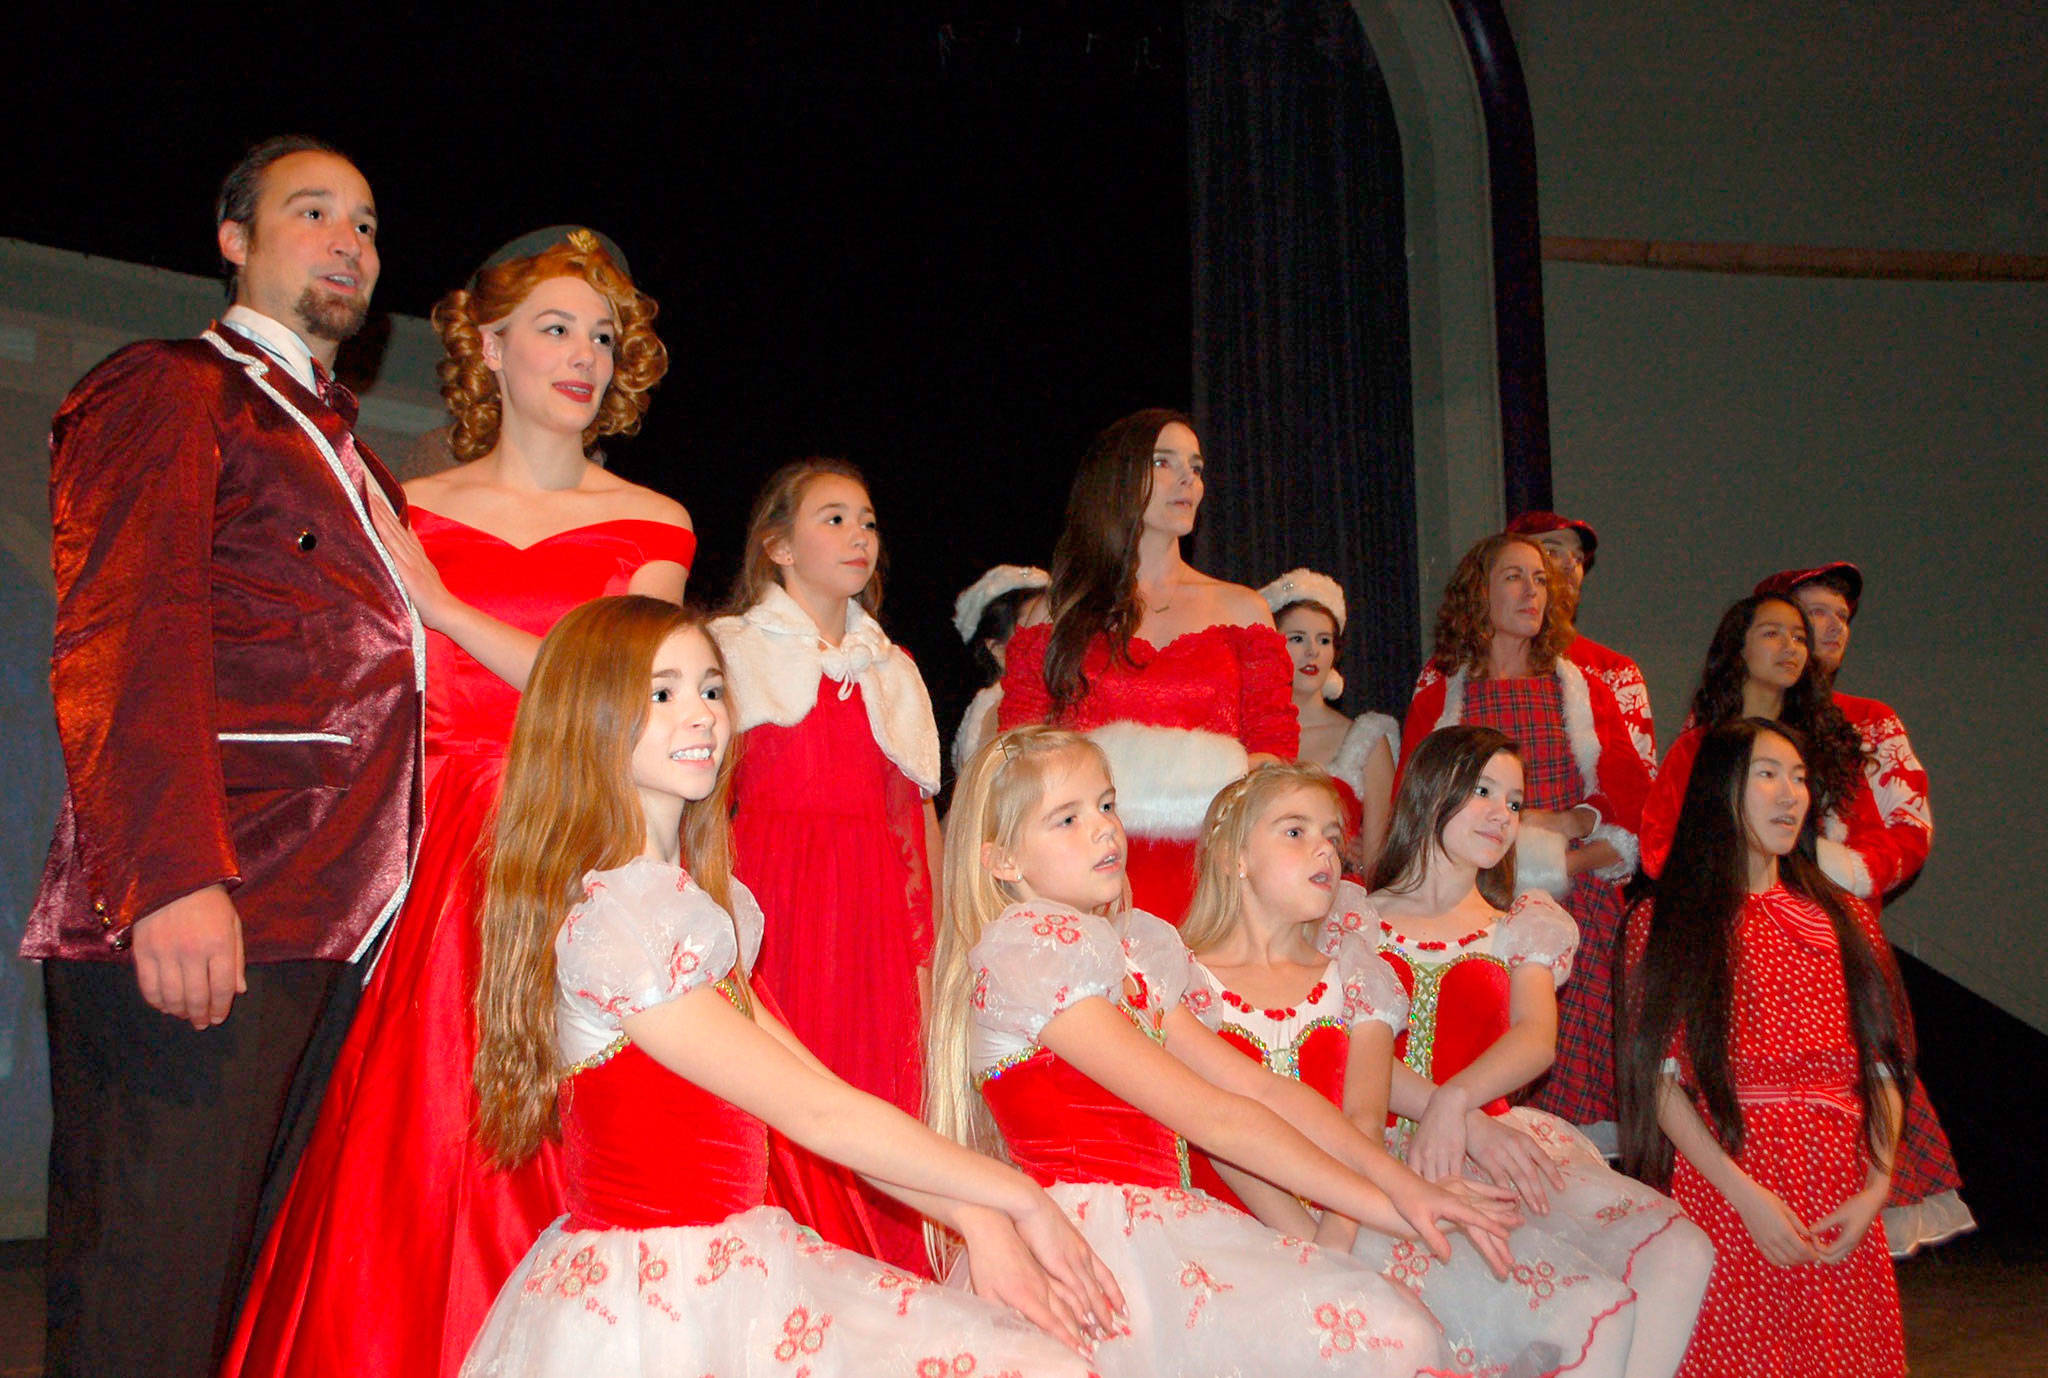 The cast of “Irving Berlin’s White Christmas” from back left, Jeremy Pederson, Danielle Lorentzen, Flora Sullivan, Kate Long, Ali Cobb, Kayla Oakes, Noah Long, Isabella Knott and Quinton Cornell, and front left, Ava Johnson, Selah and Aria Turrey, Courtney Smith and Meiqi Liang rehearse one of the scenes from the musical that will play at the Sequim High School Theater starting Dec. 7. Sequim Gazette photo by Erin Hawkins